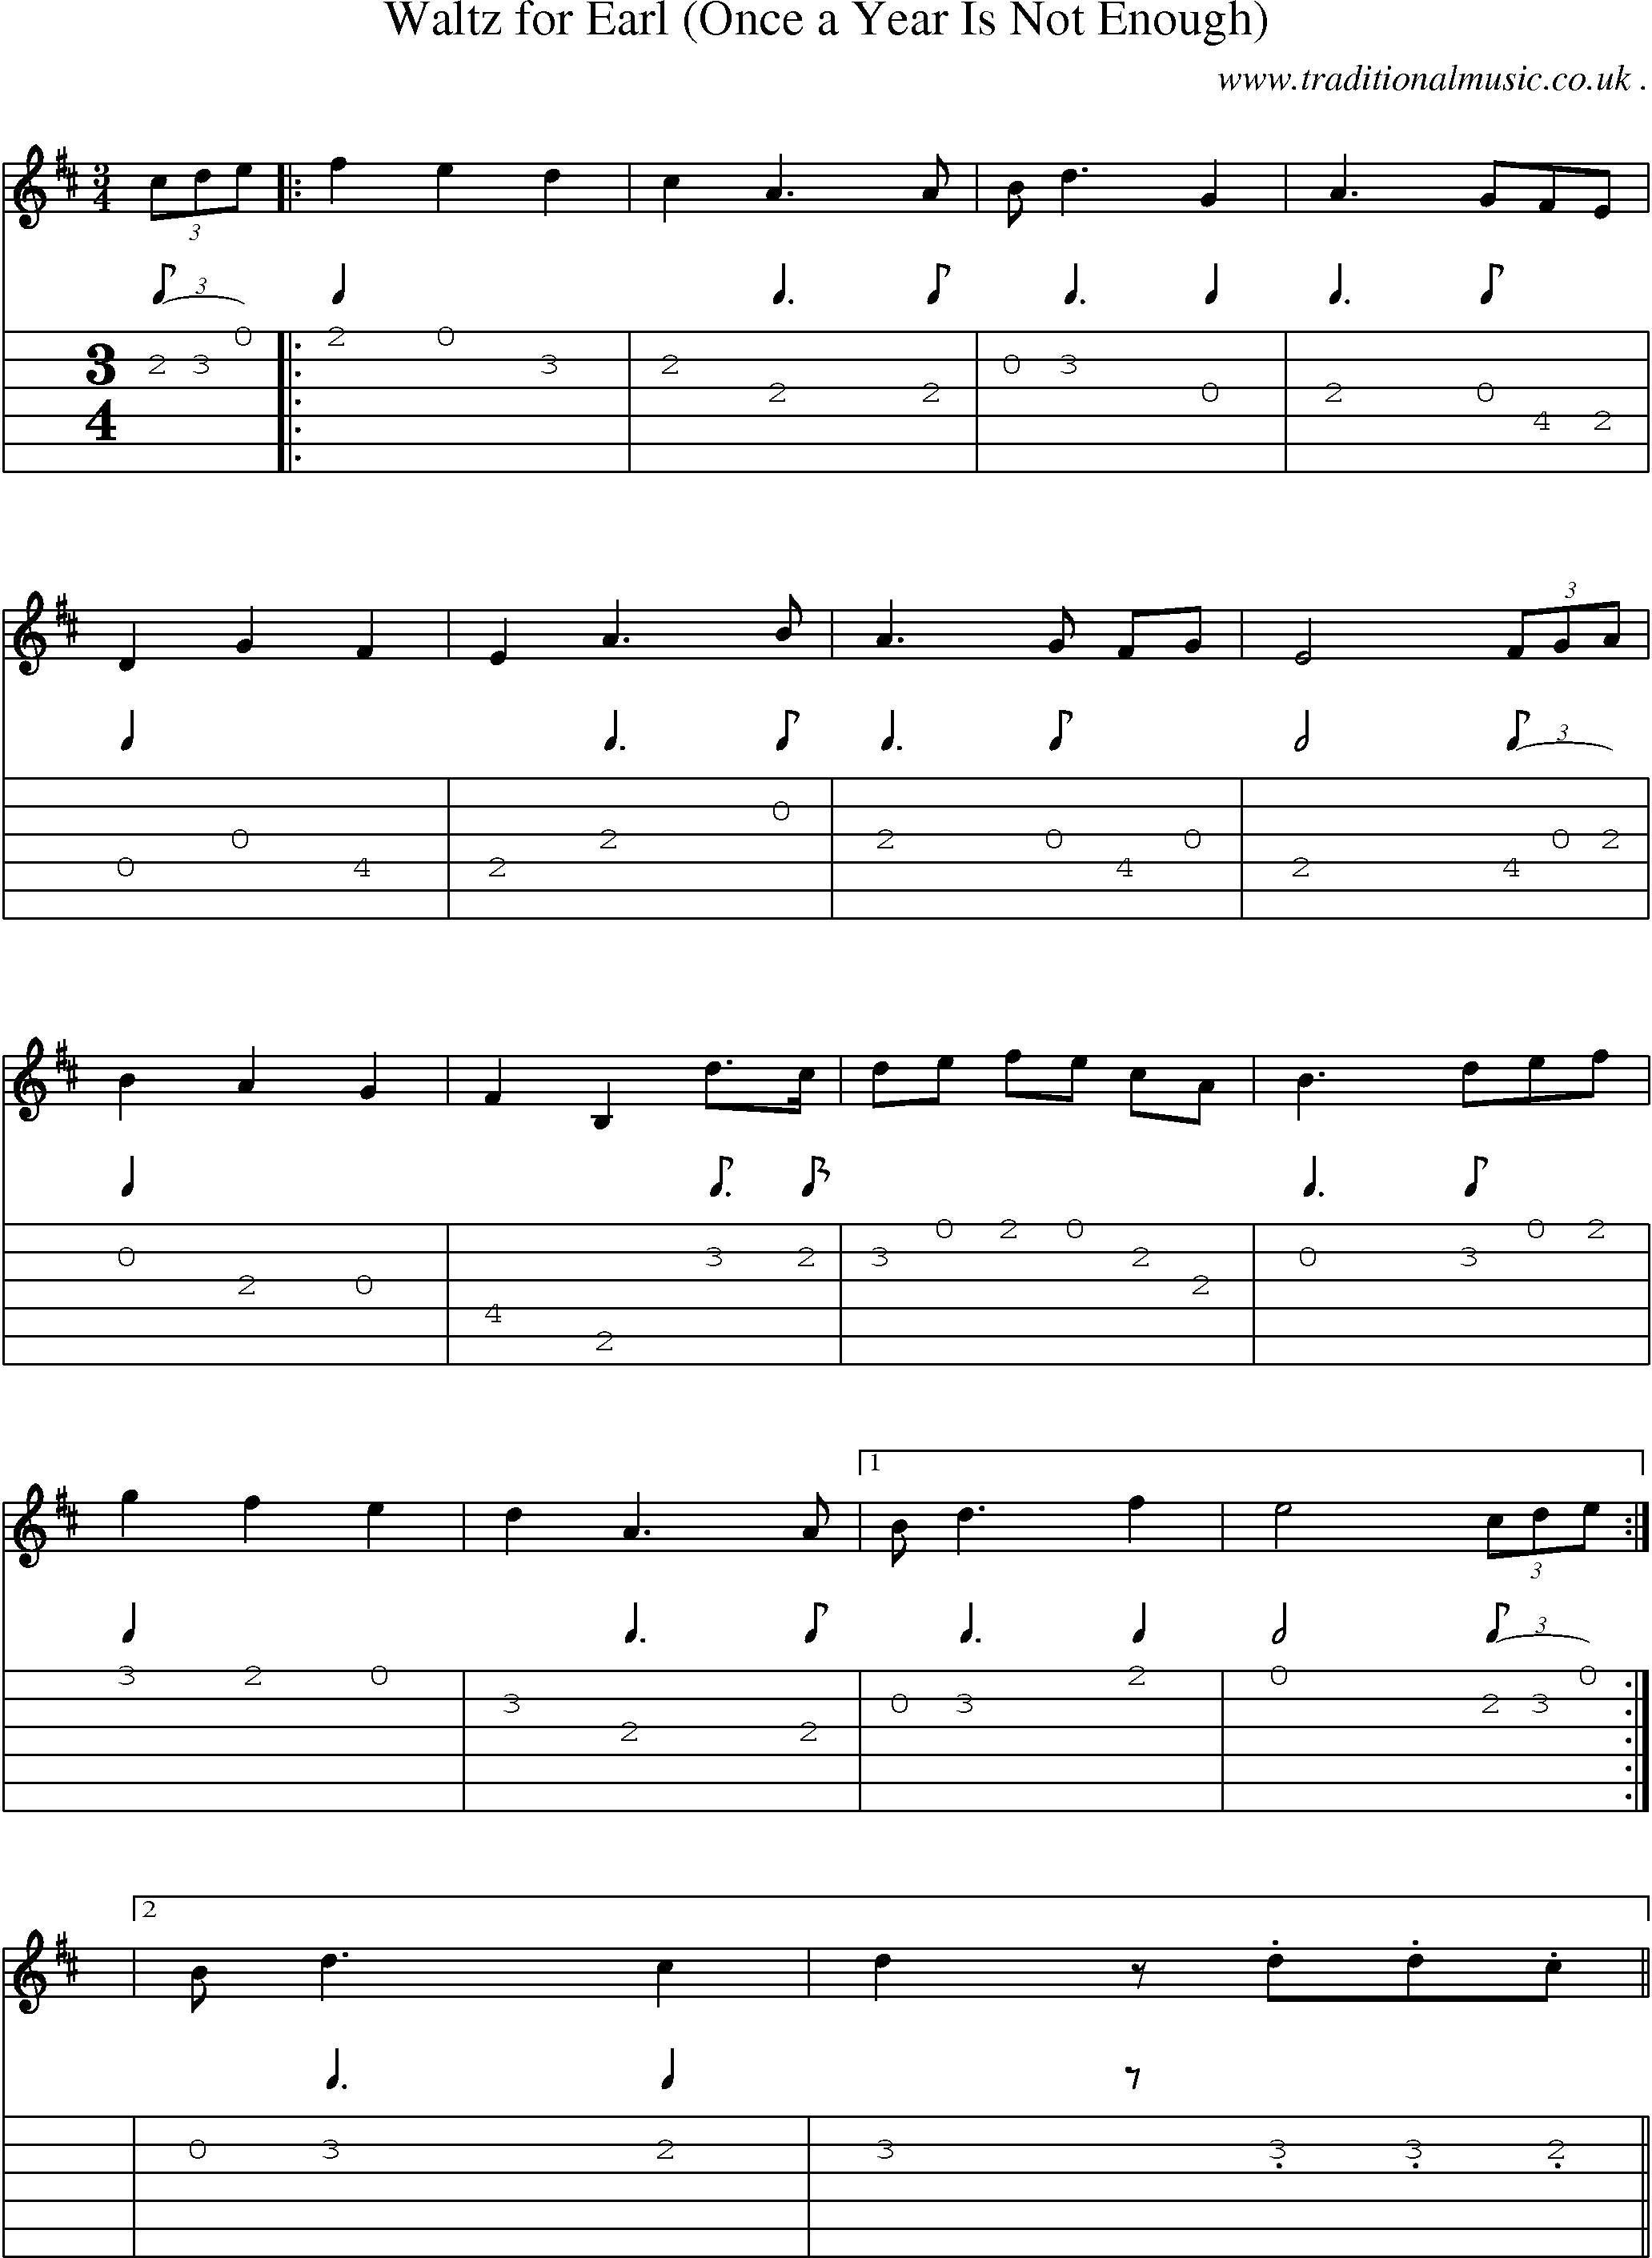 Sheet-Music and Guitar Tabs for Waltz For Earl (once A Year Is Not Enough)